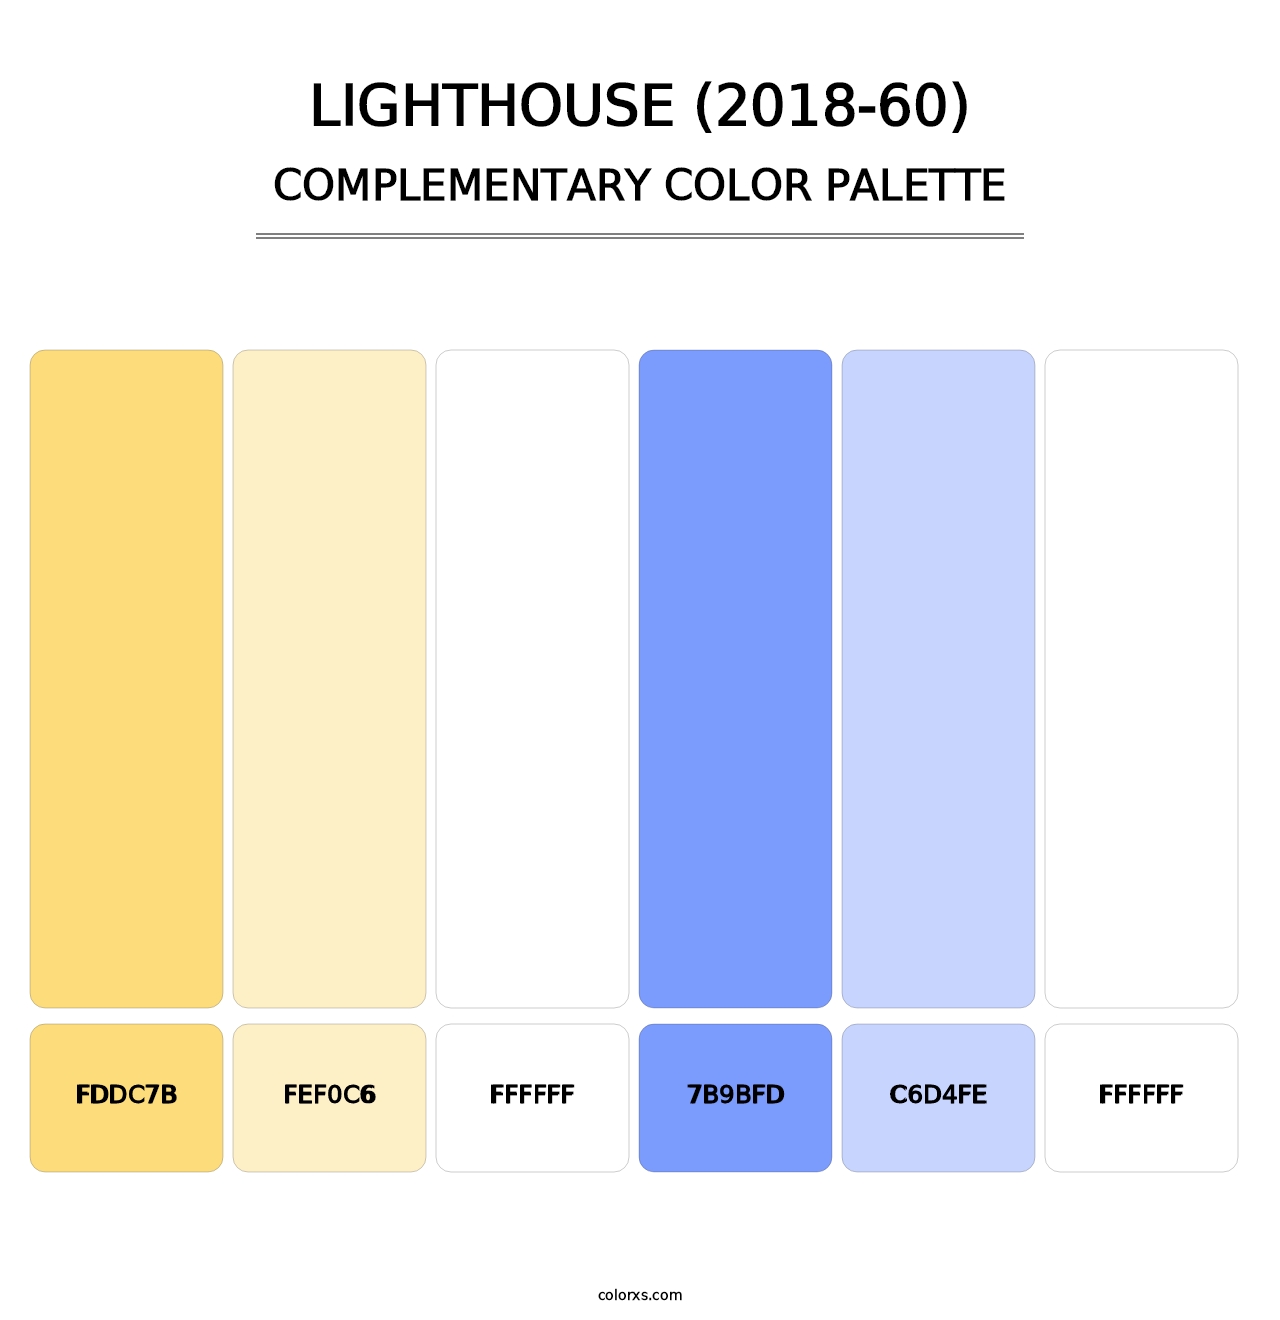 Lighthouse (2018-60) - Complementary Color Palette